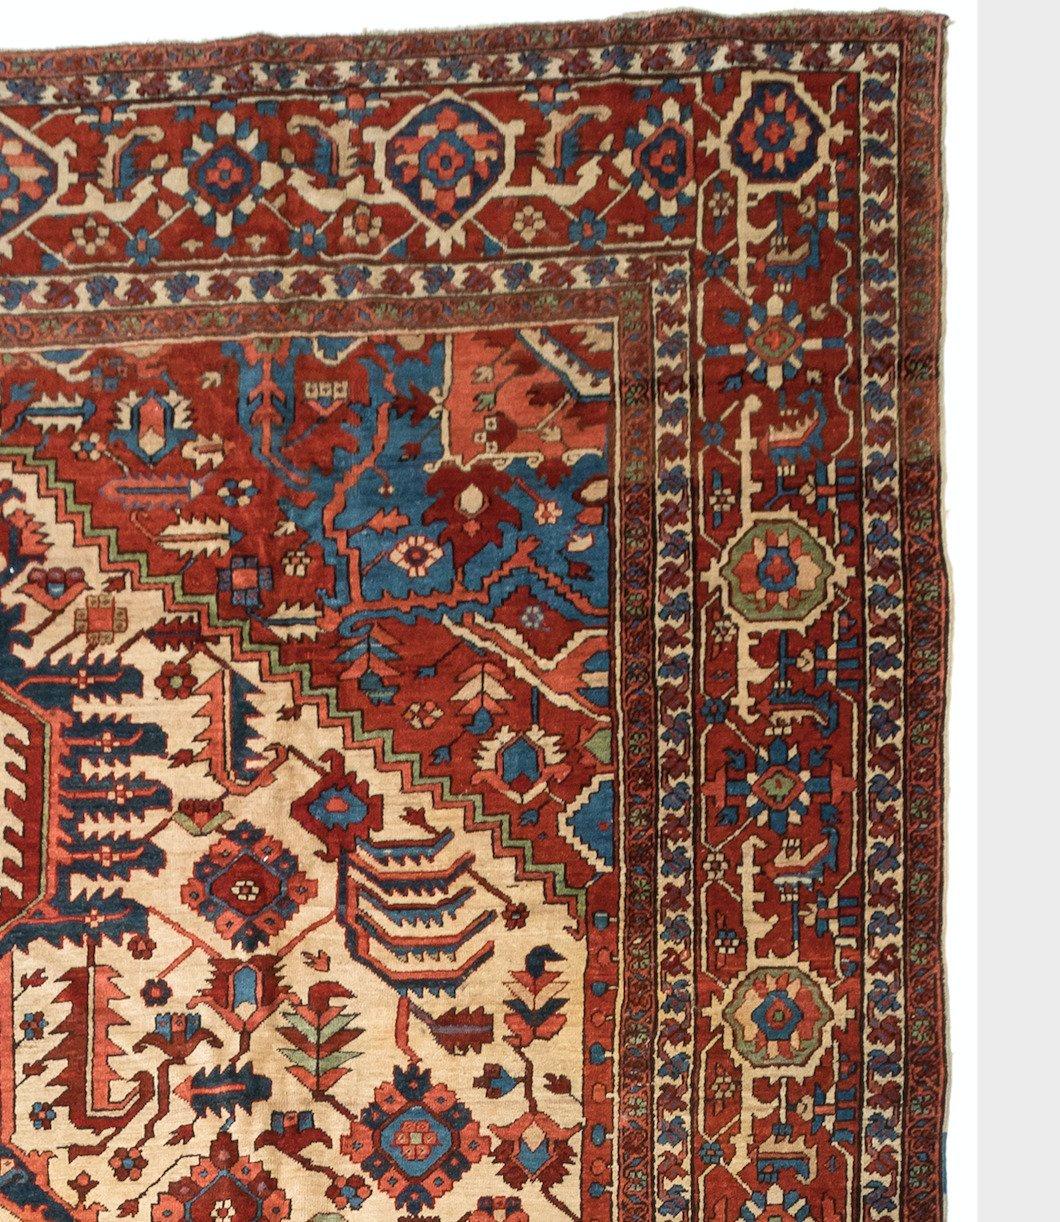 Hand-Knotted Antique Oversize Persian Red Ivory Navy Serapi Rug, c. 1875-1880